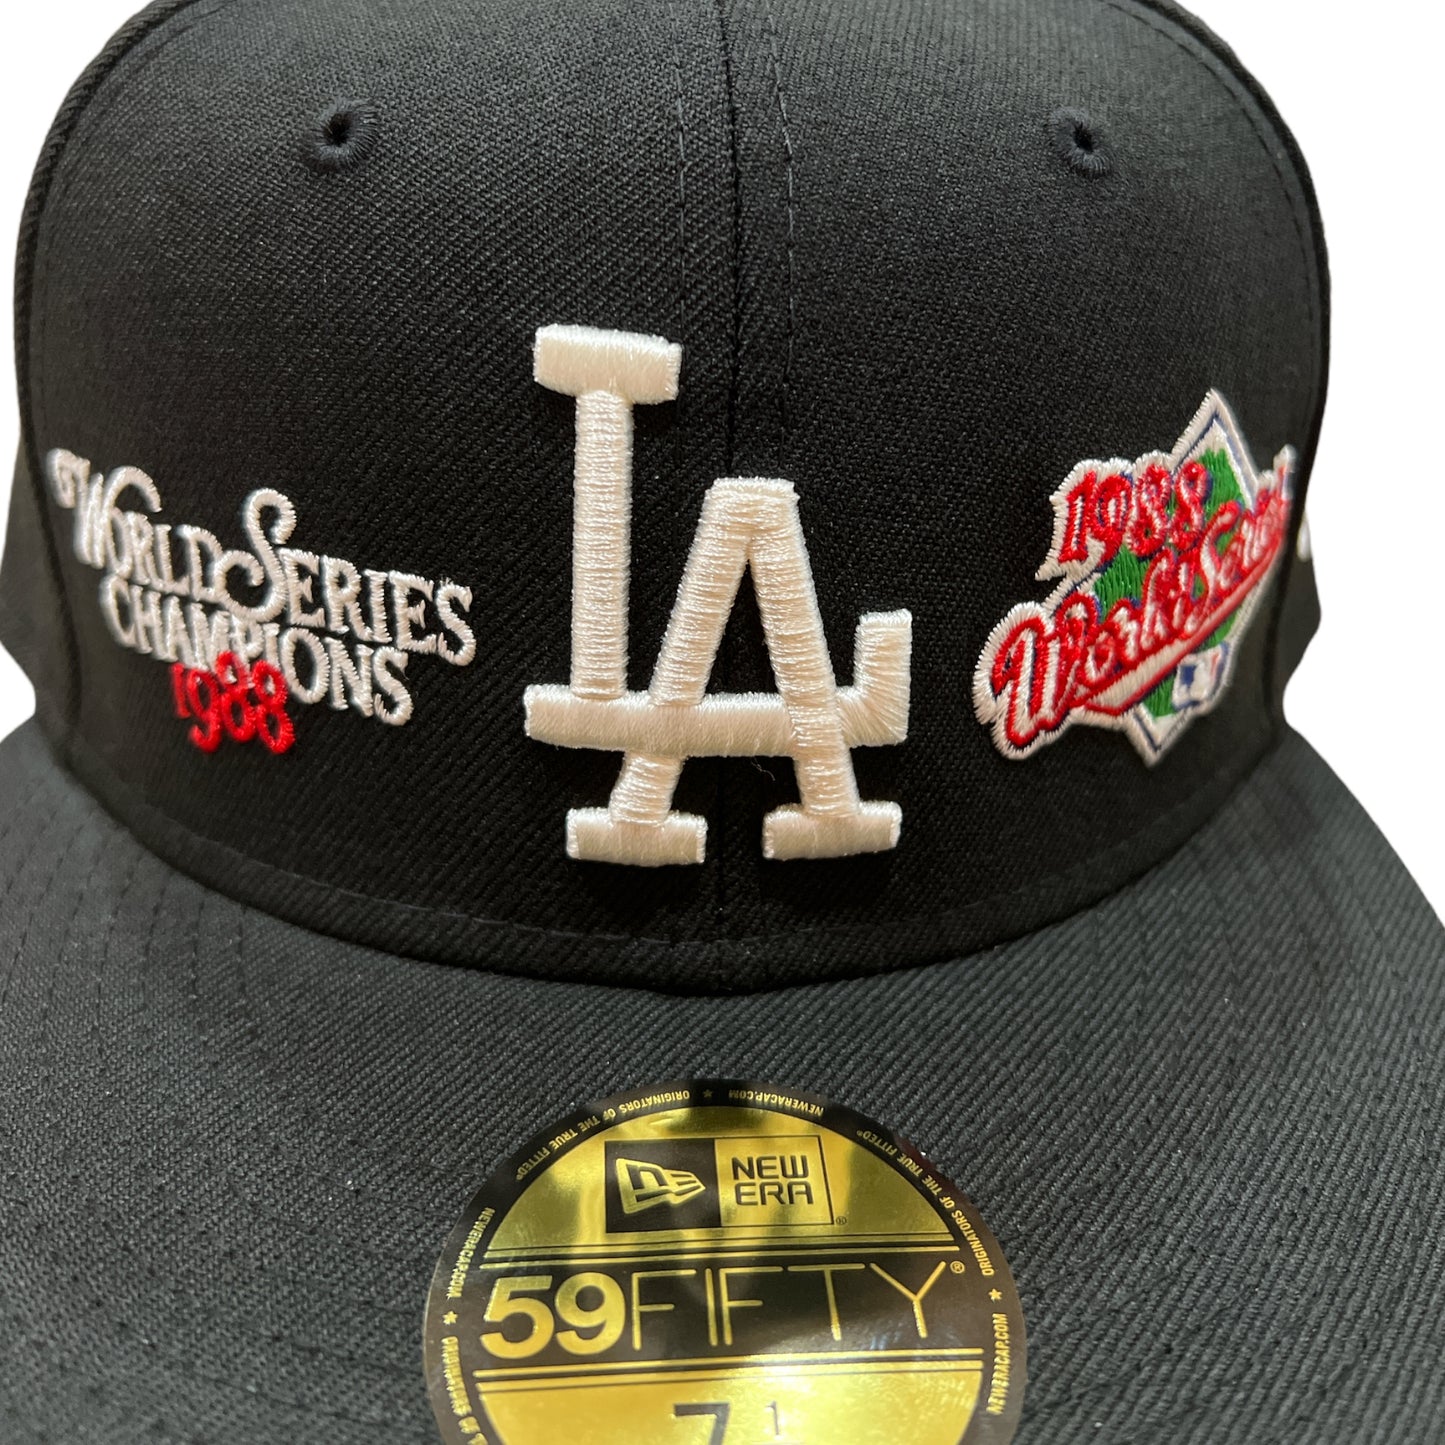 Los Angeles Dodgers 1988 World Champs New Era Fitted Black Hat